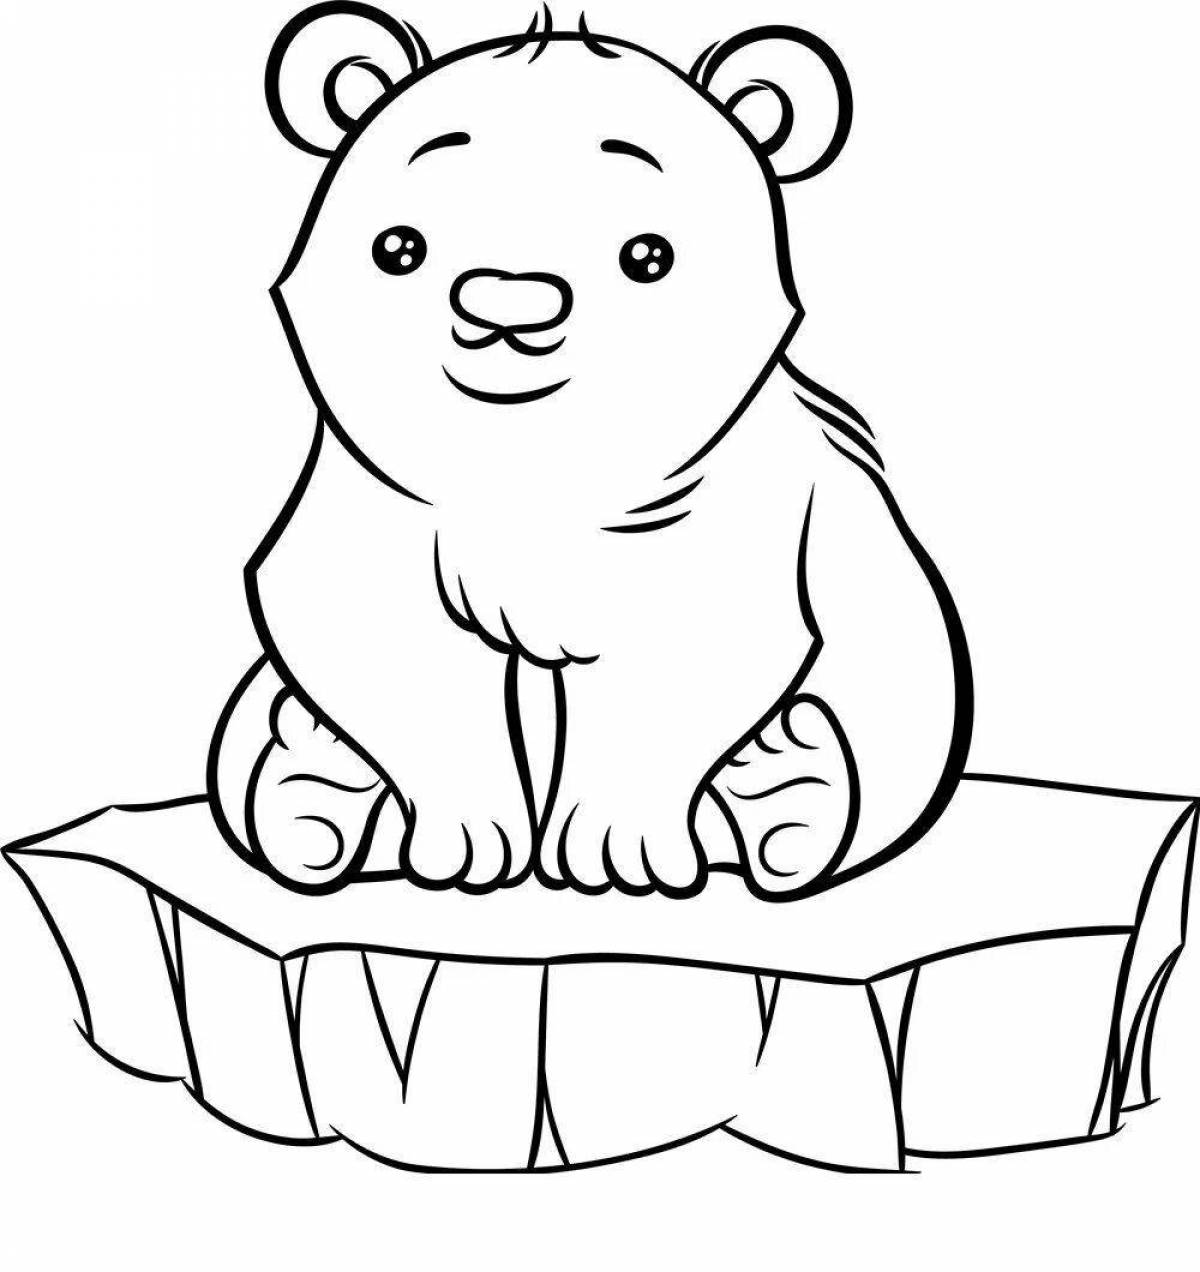 Polar bear frolicking coloring pages